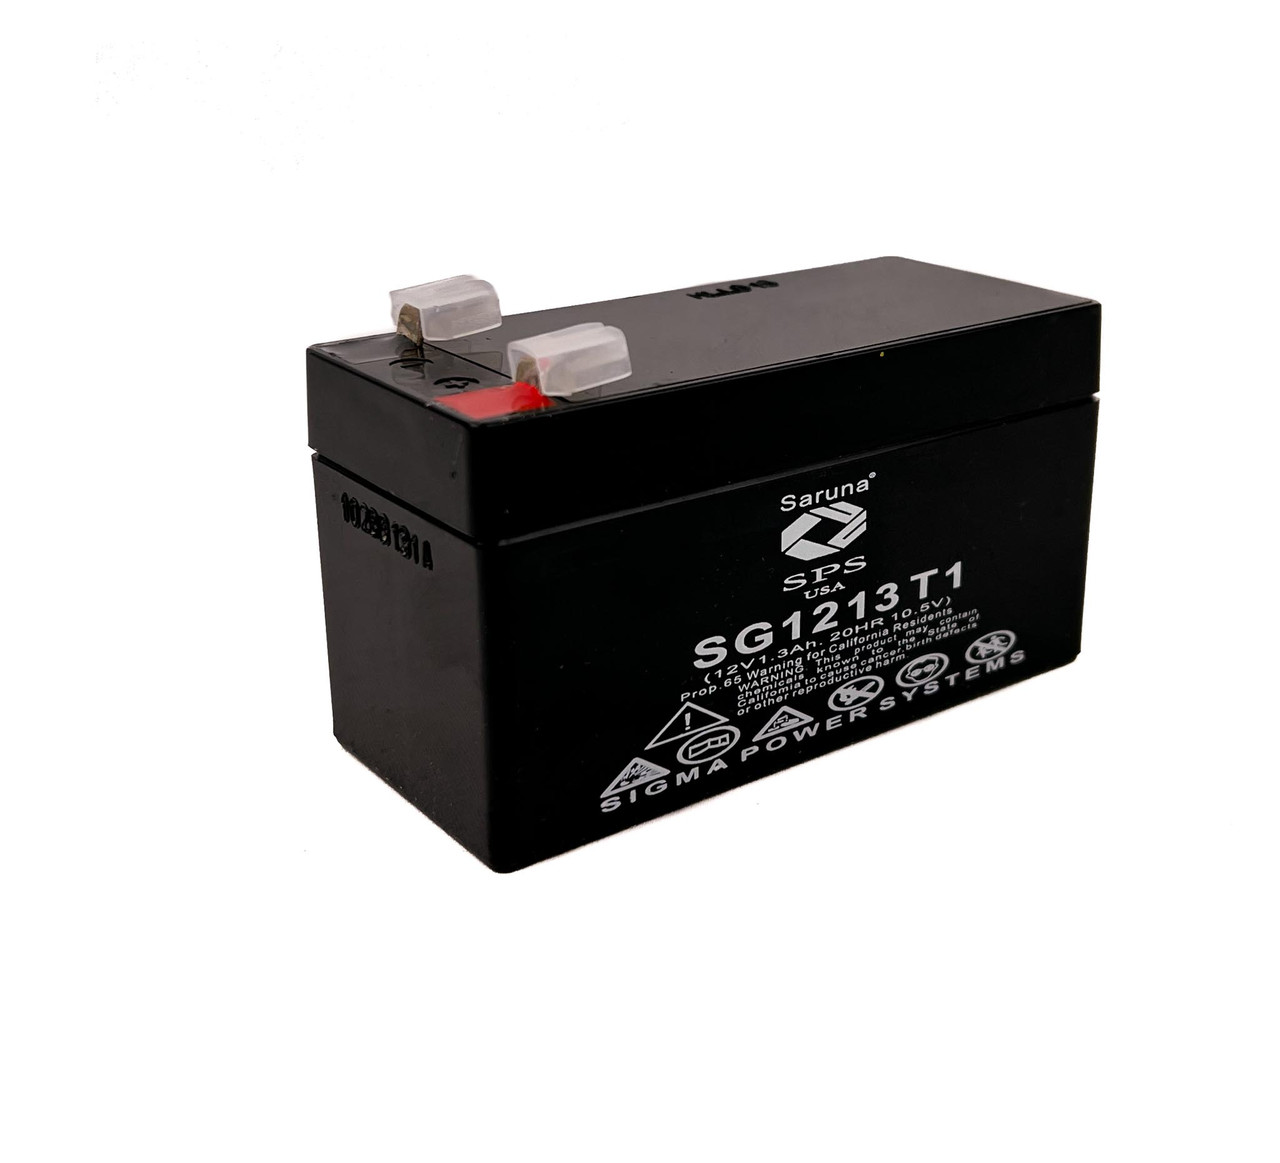 Raion Power 12V 1.3Ah Non-Spillable Replacement Rechargebale Battery for 2010 Freelander 2 17C635 BJ32-19G207C-AA